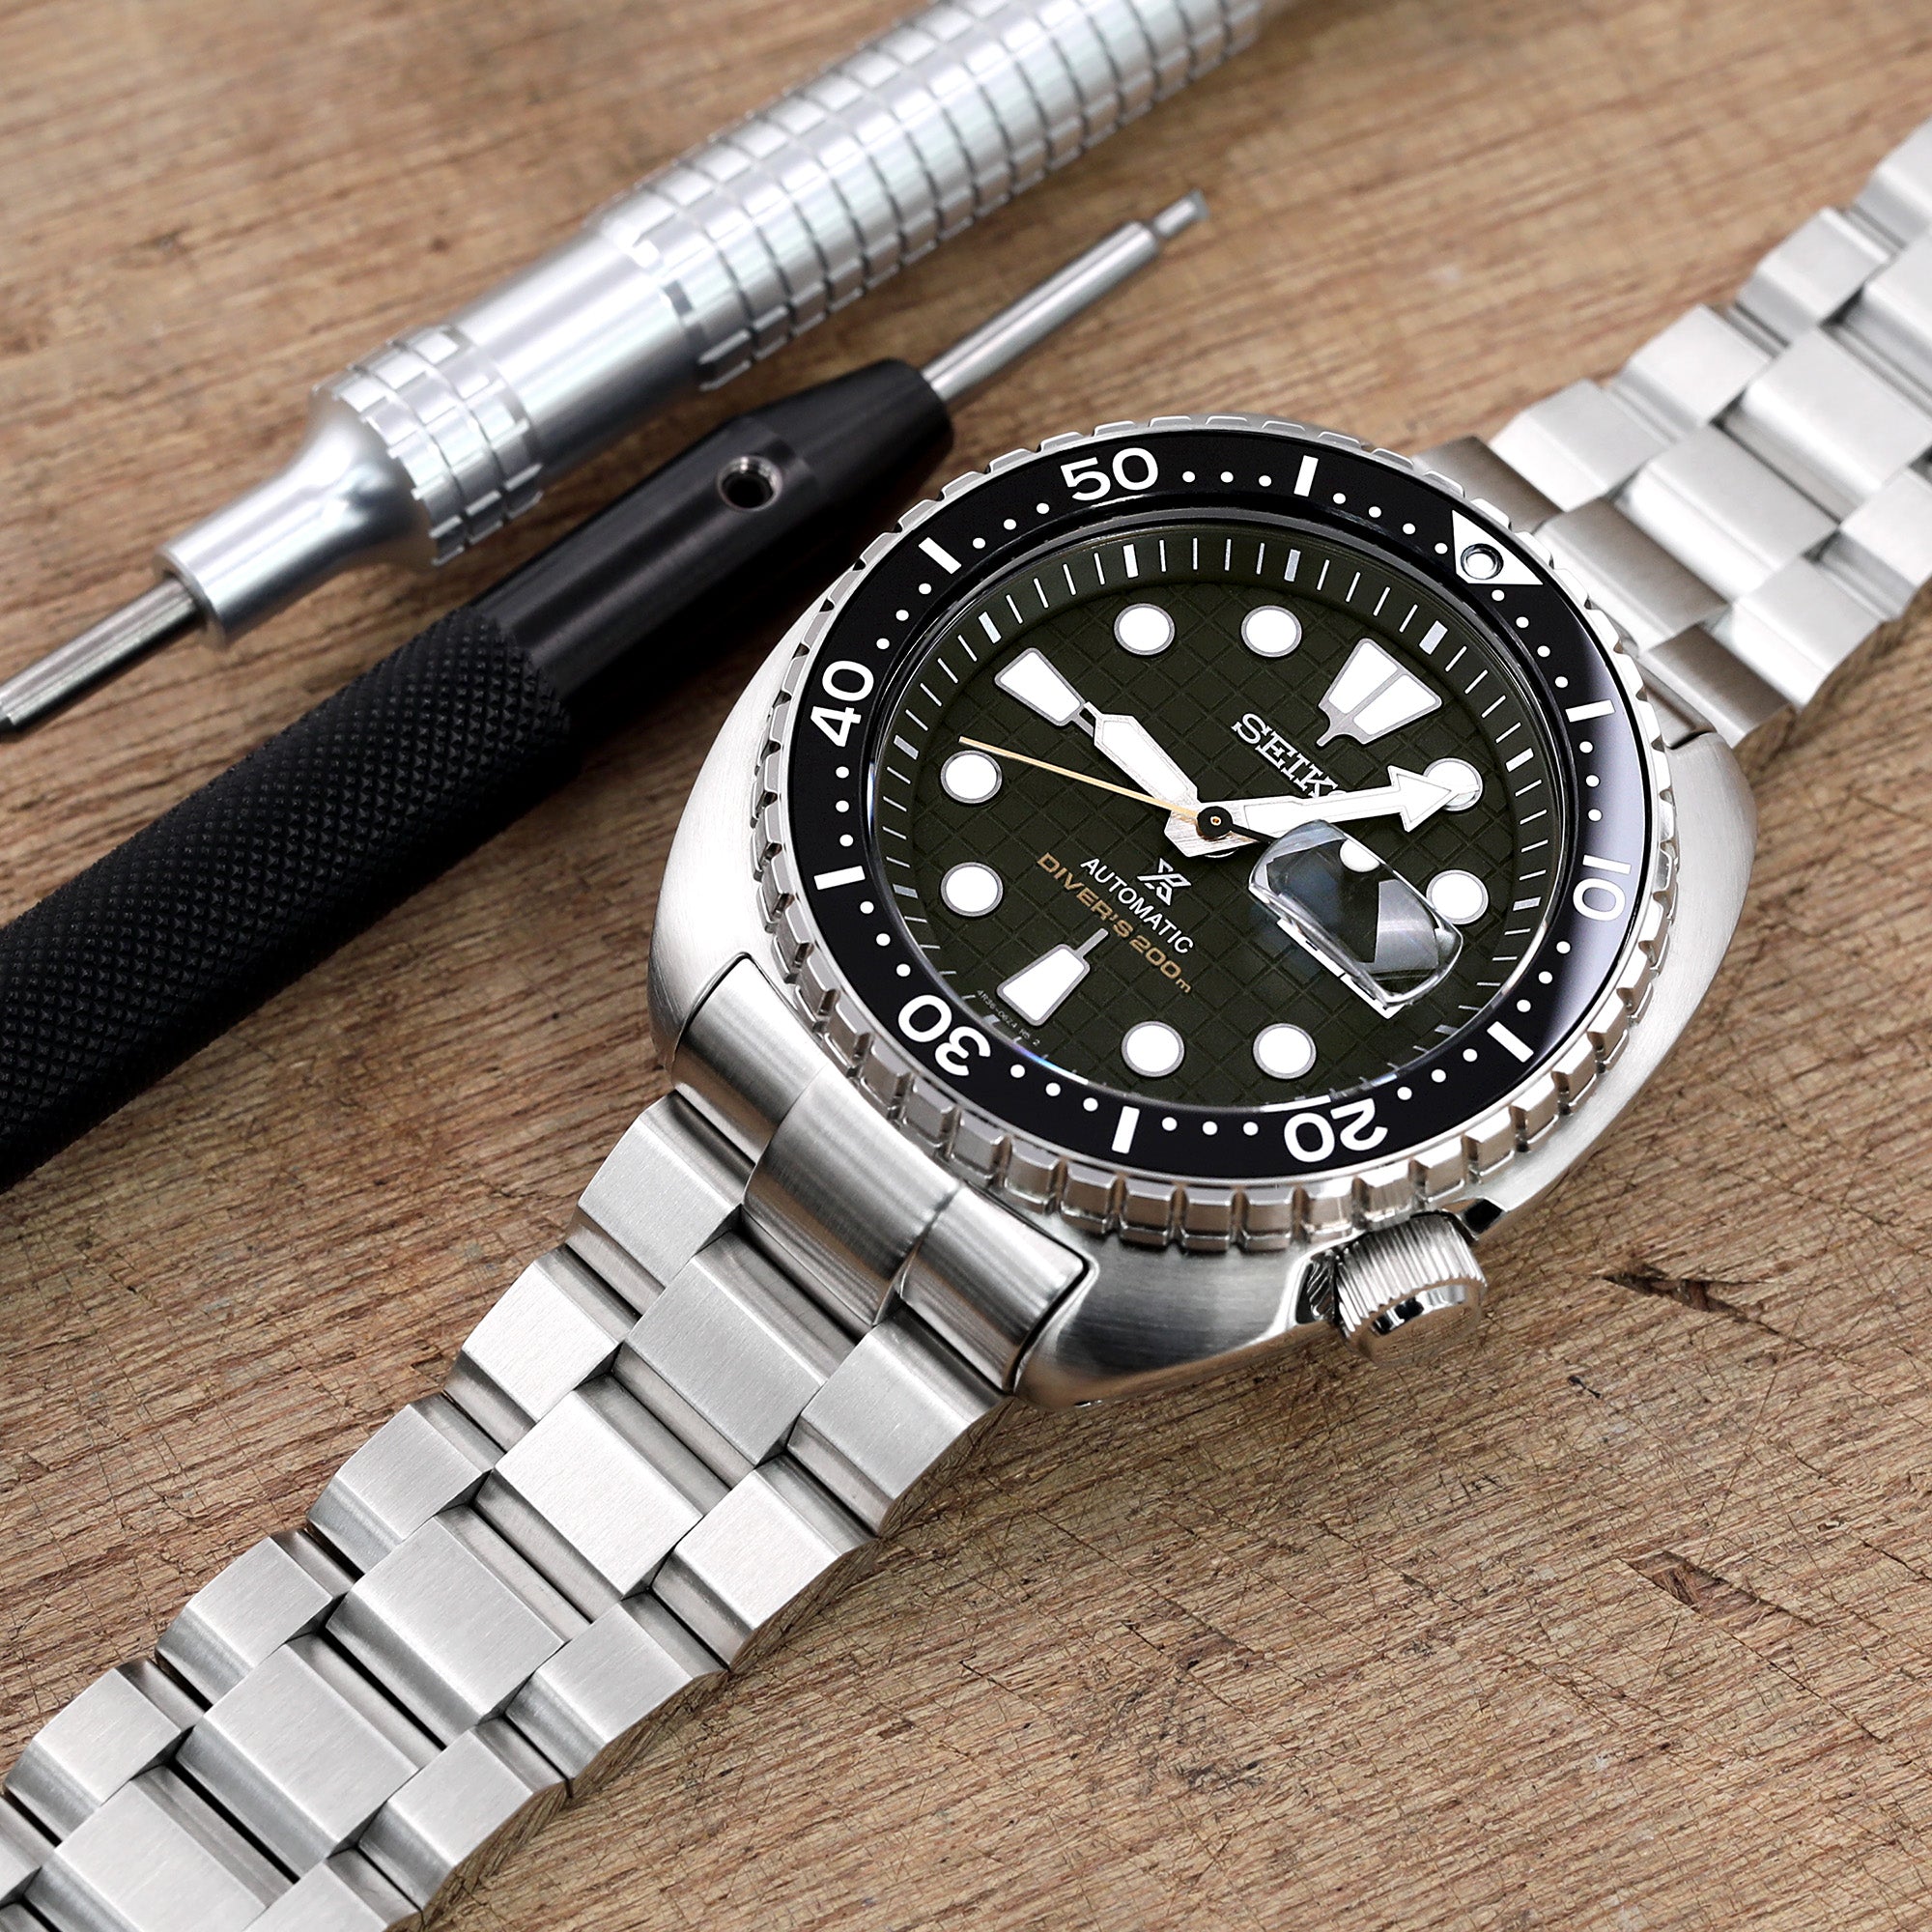 Watch Bands  Watch Straps  Upgrade your Seiko watch  Strapcode